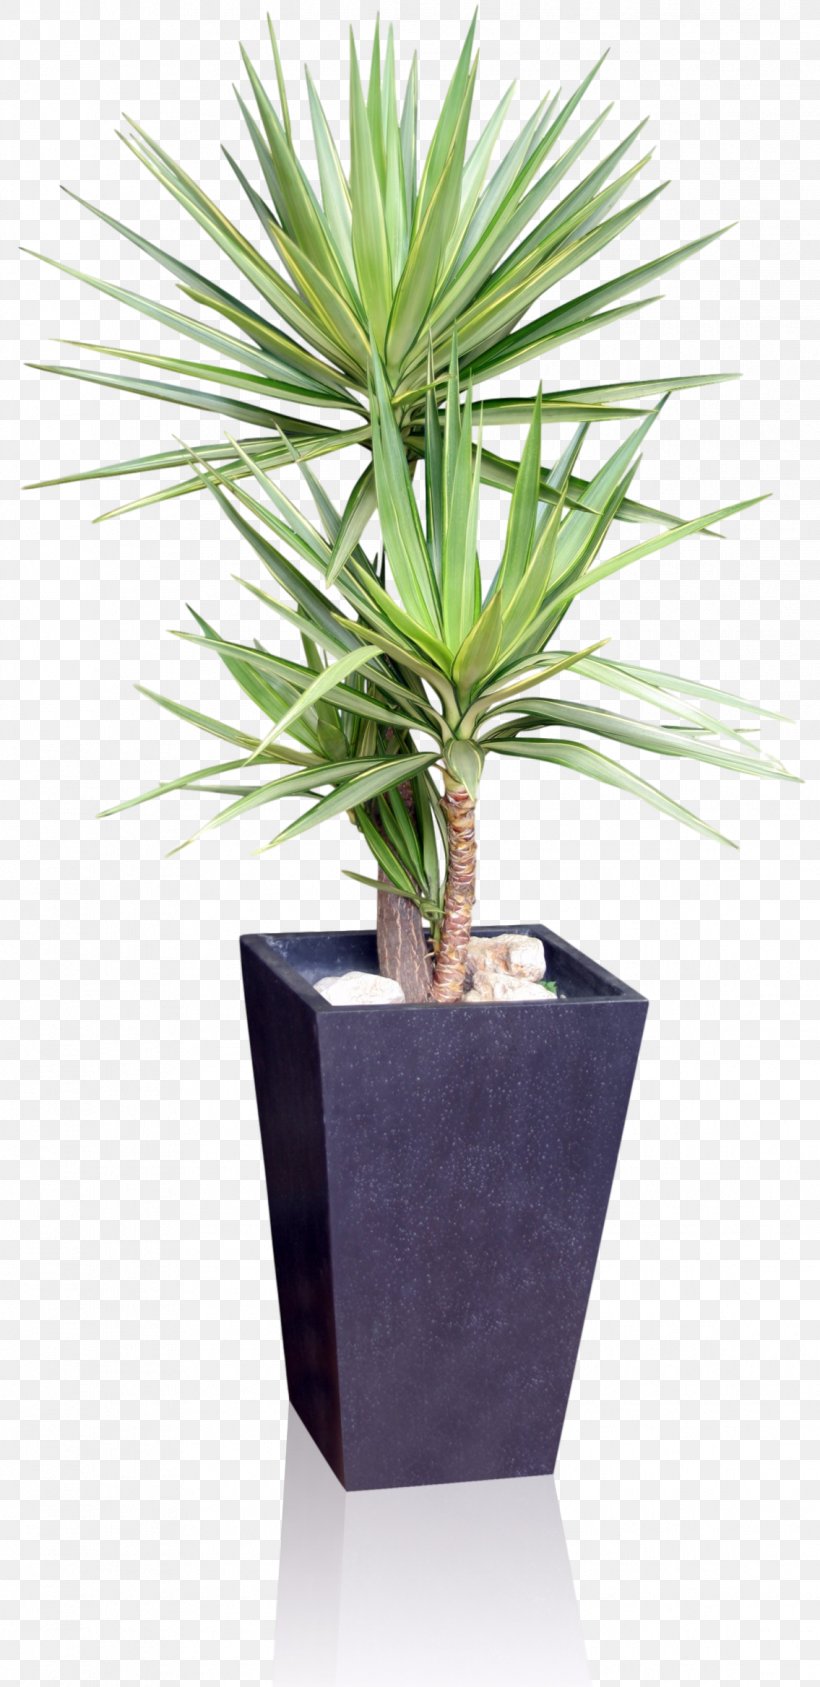 Houseplant Flowerpot Yucca Gloriosa Spineless Yucca, PNG, 1135x2336px, Houseplant, Agave, Arecales, Dracaena, Evergreen Download Free